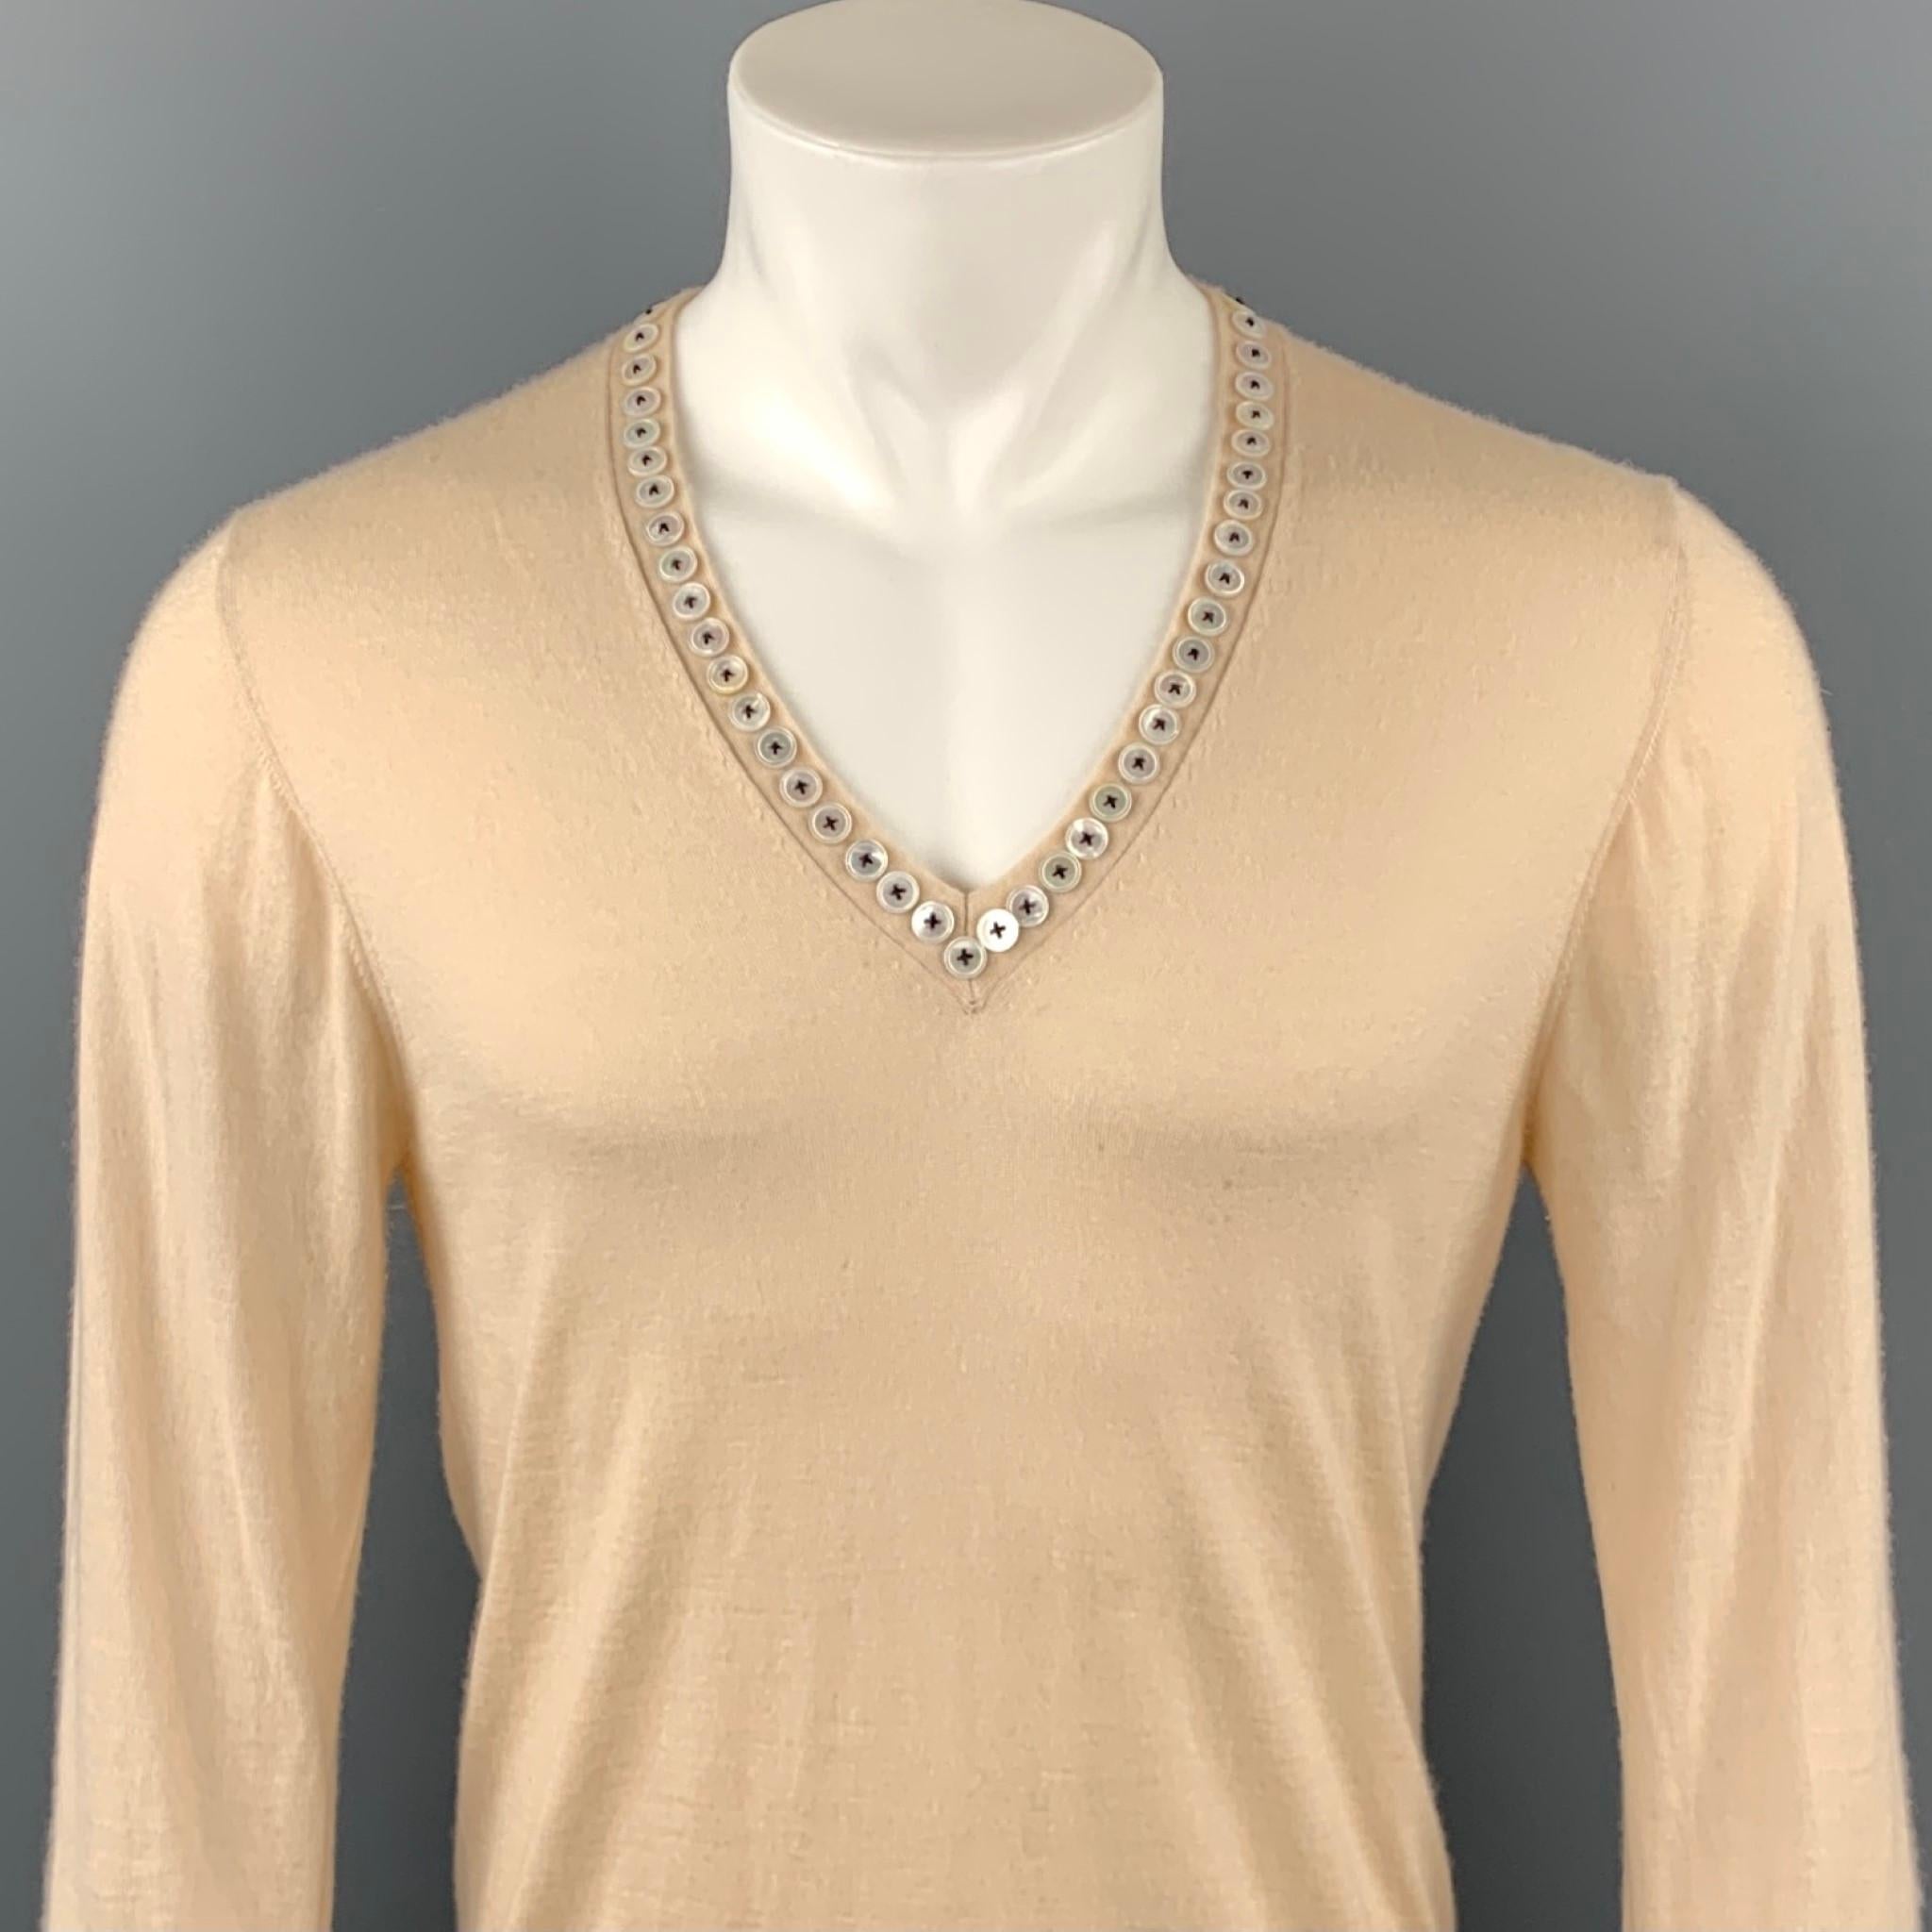 ALEXANDER McQUEEN sweater comes in a beige cashmere featuring a buttoned embellished v-neck. Minor discoloration. Made in Italy.

Very Good Pre-Owned Condition.
Marked: L

Measurements:

Shoulder: 17 in. 
Chest: 38 in. 
Sleeve: 28 in. 
Length: 26.5